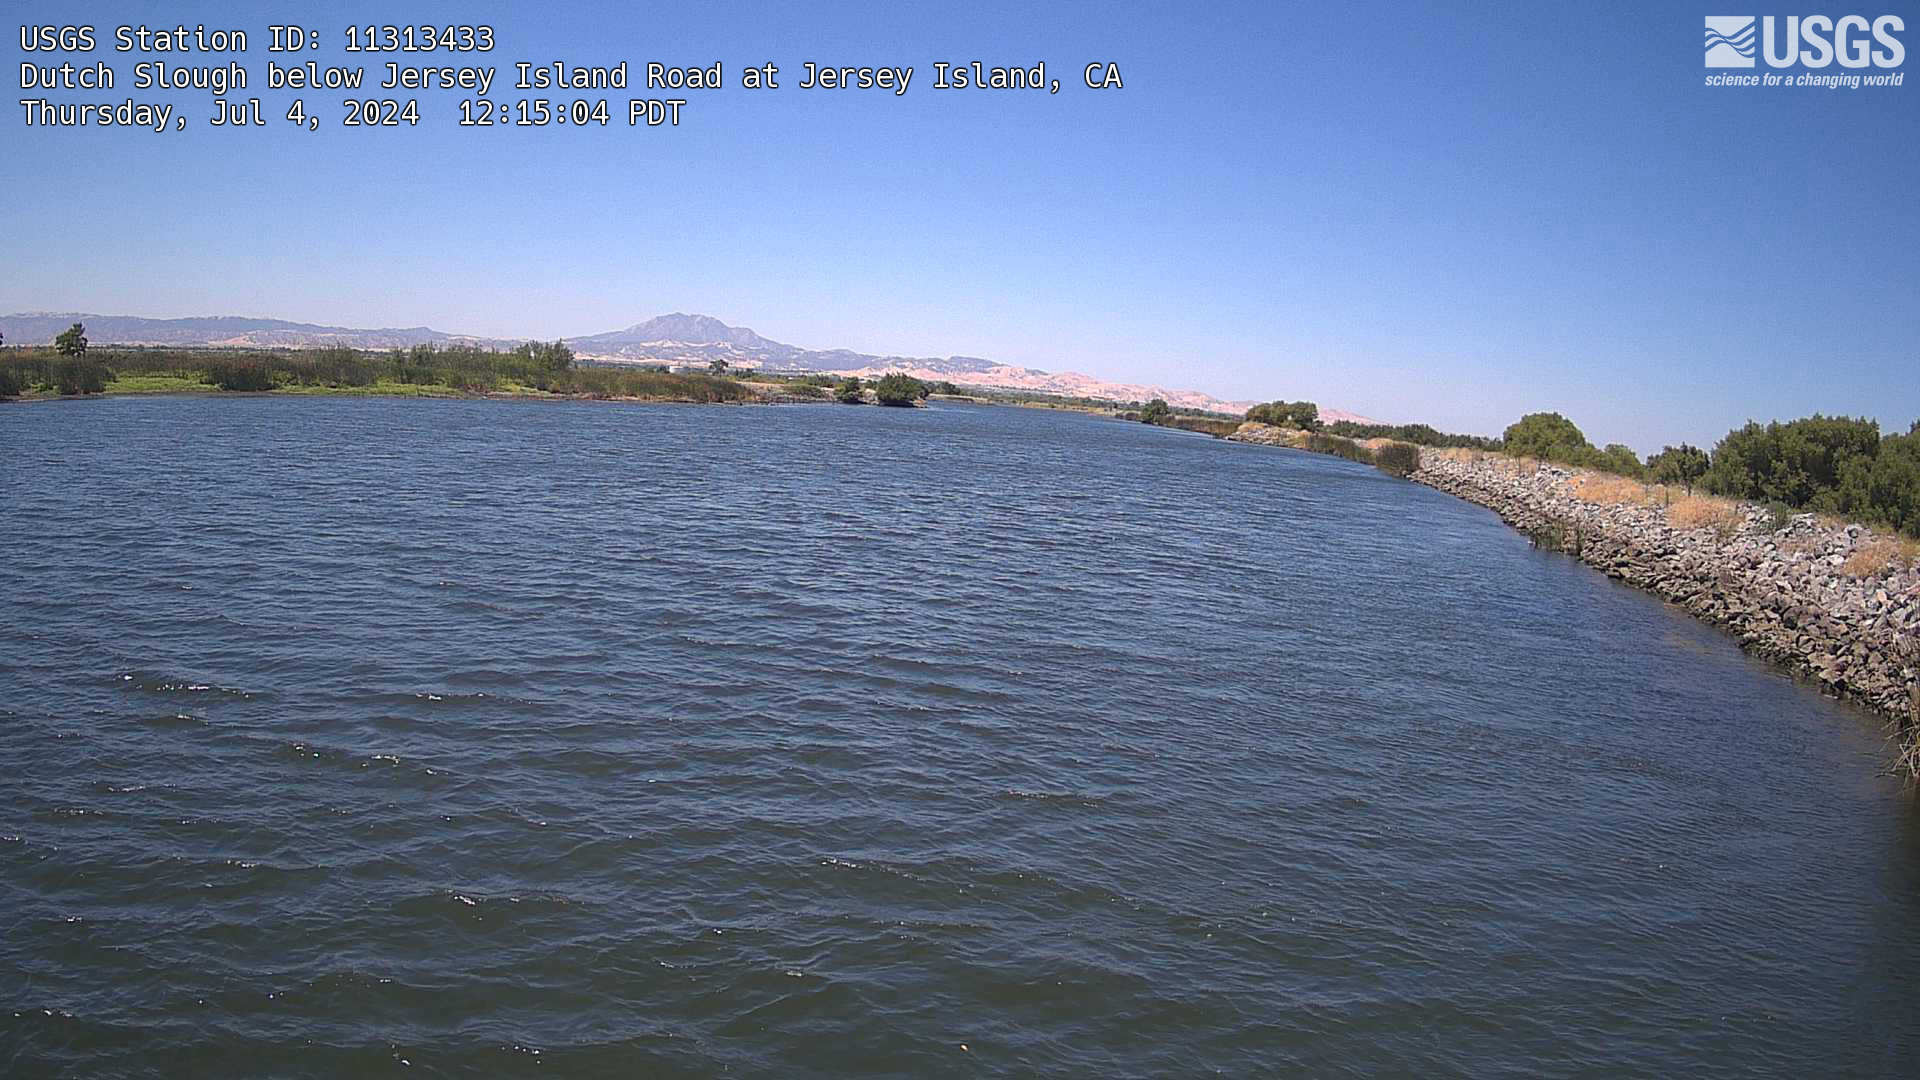 This is the most recent camera image of Dutch Slough below Jersey Island Road at Jersey Island webcam.